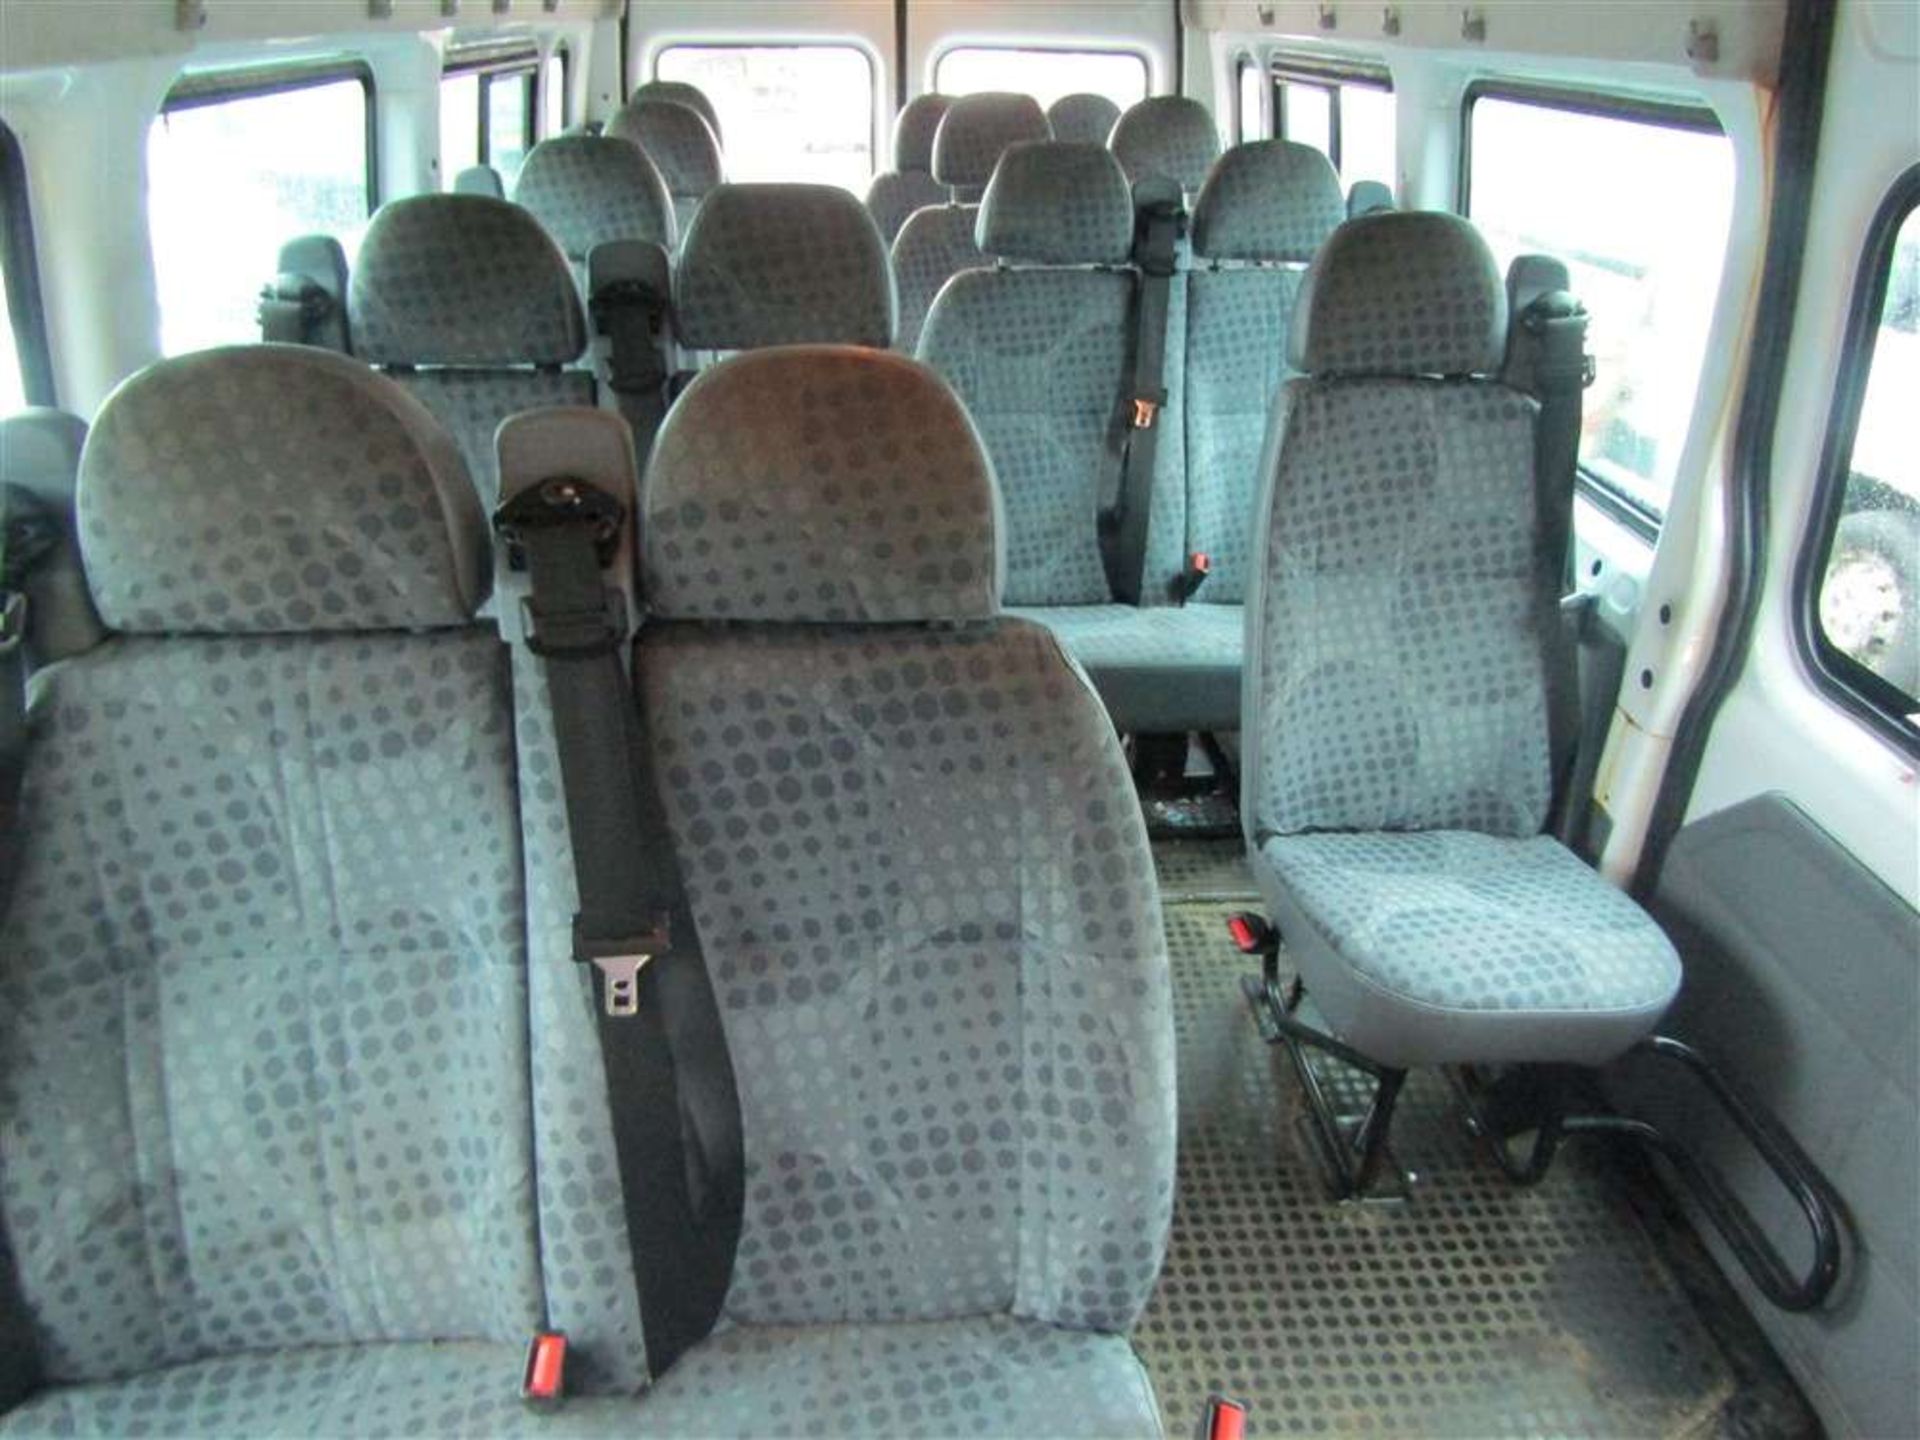 2008 58 reg Ford Transit 115 T430 17S RWD Minibus (Direct Council) - Image 5 of 7